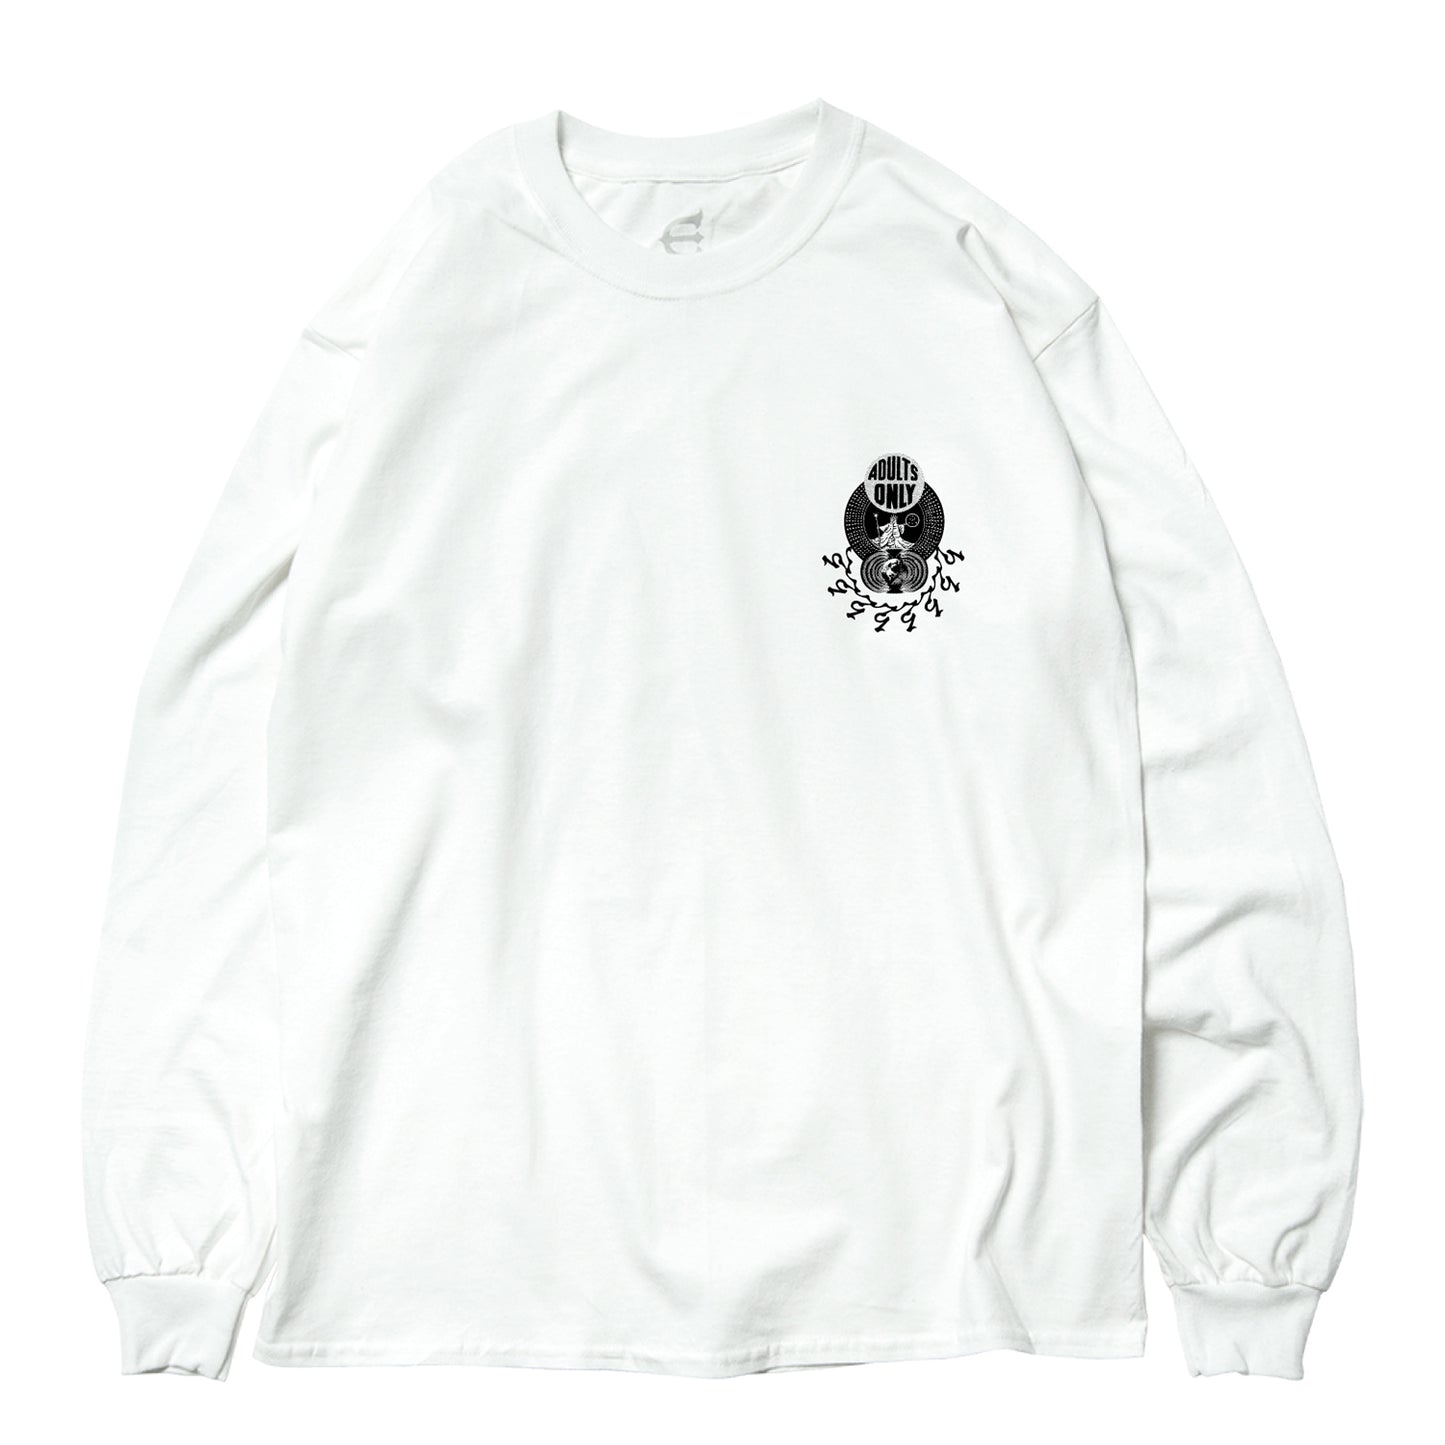 NEO ADULTS ONLY LS - WHITE